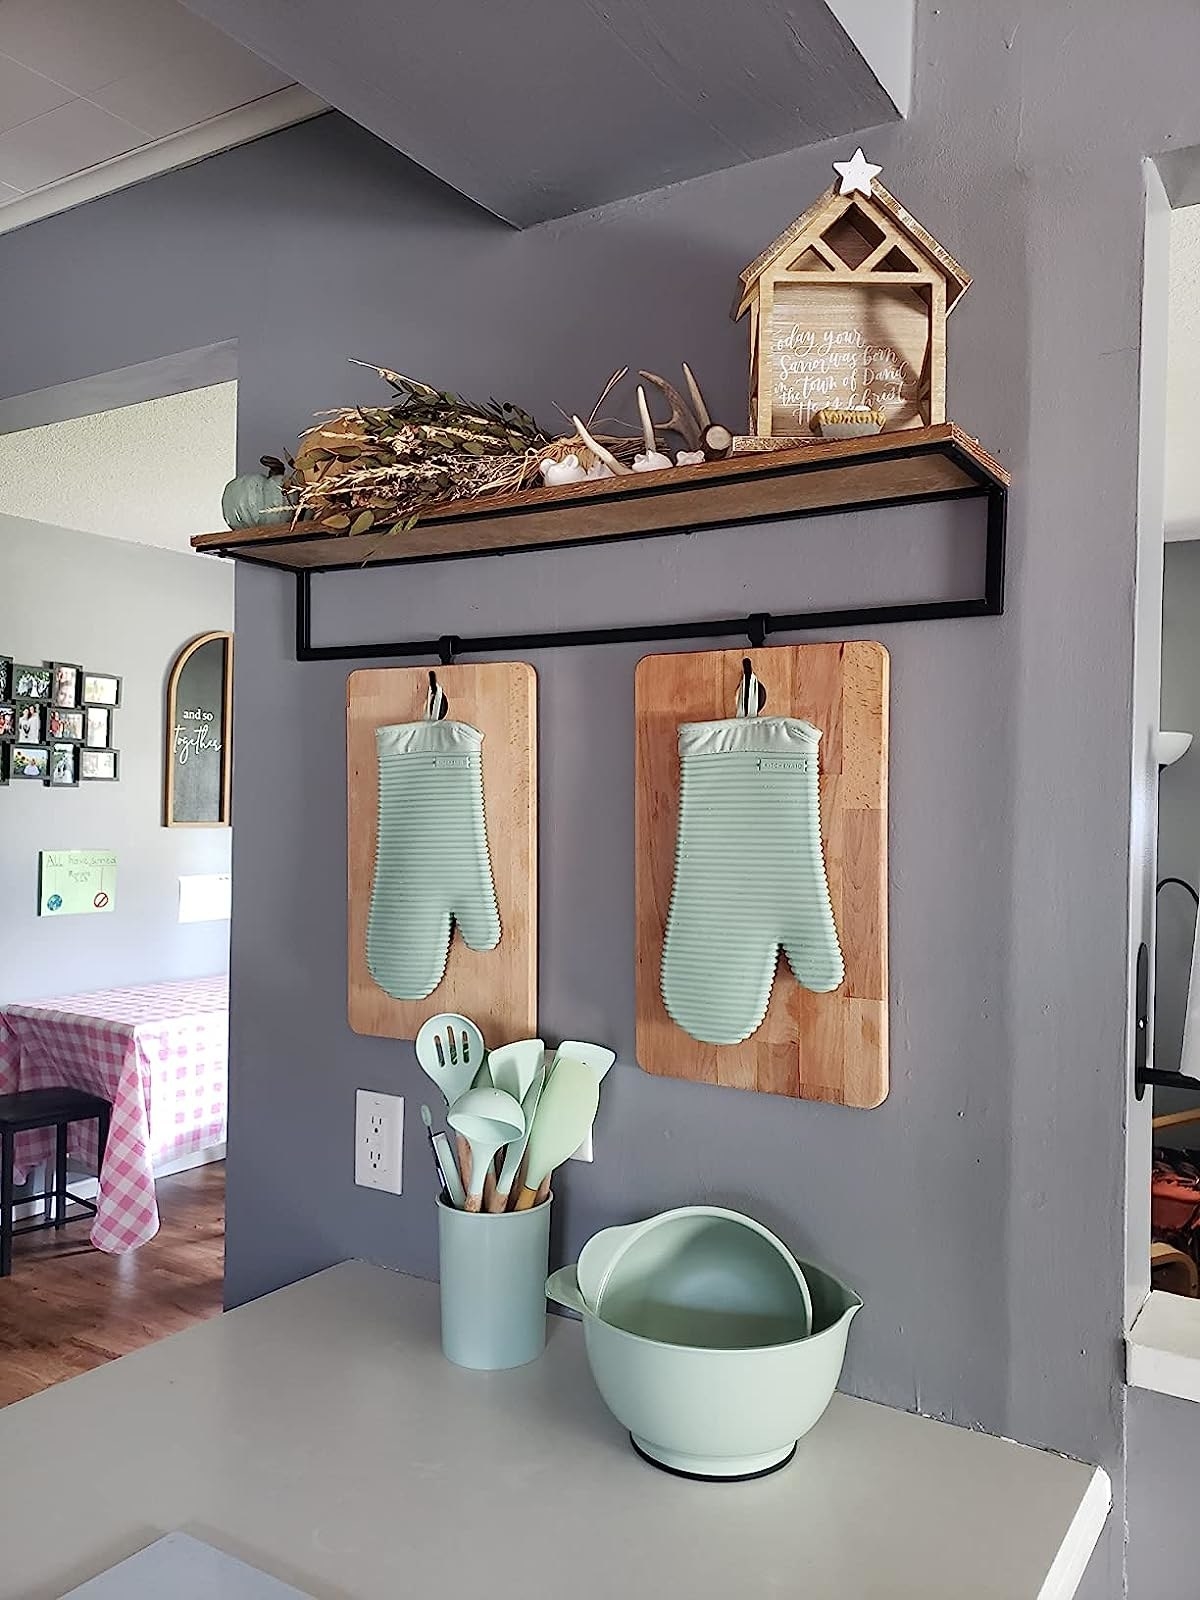 The teal mitts hanging in front of cutting boards on kitchen wall